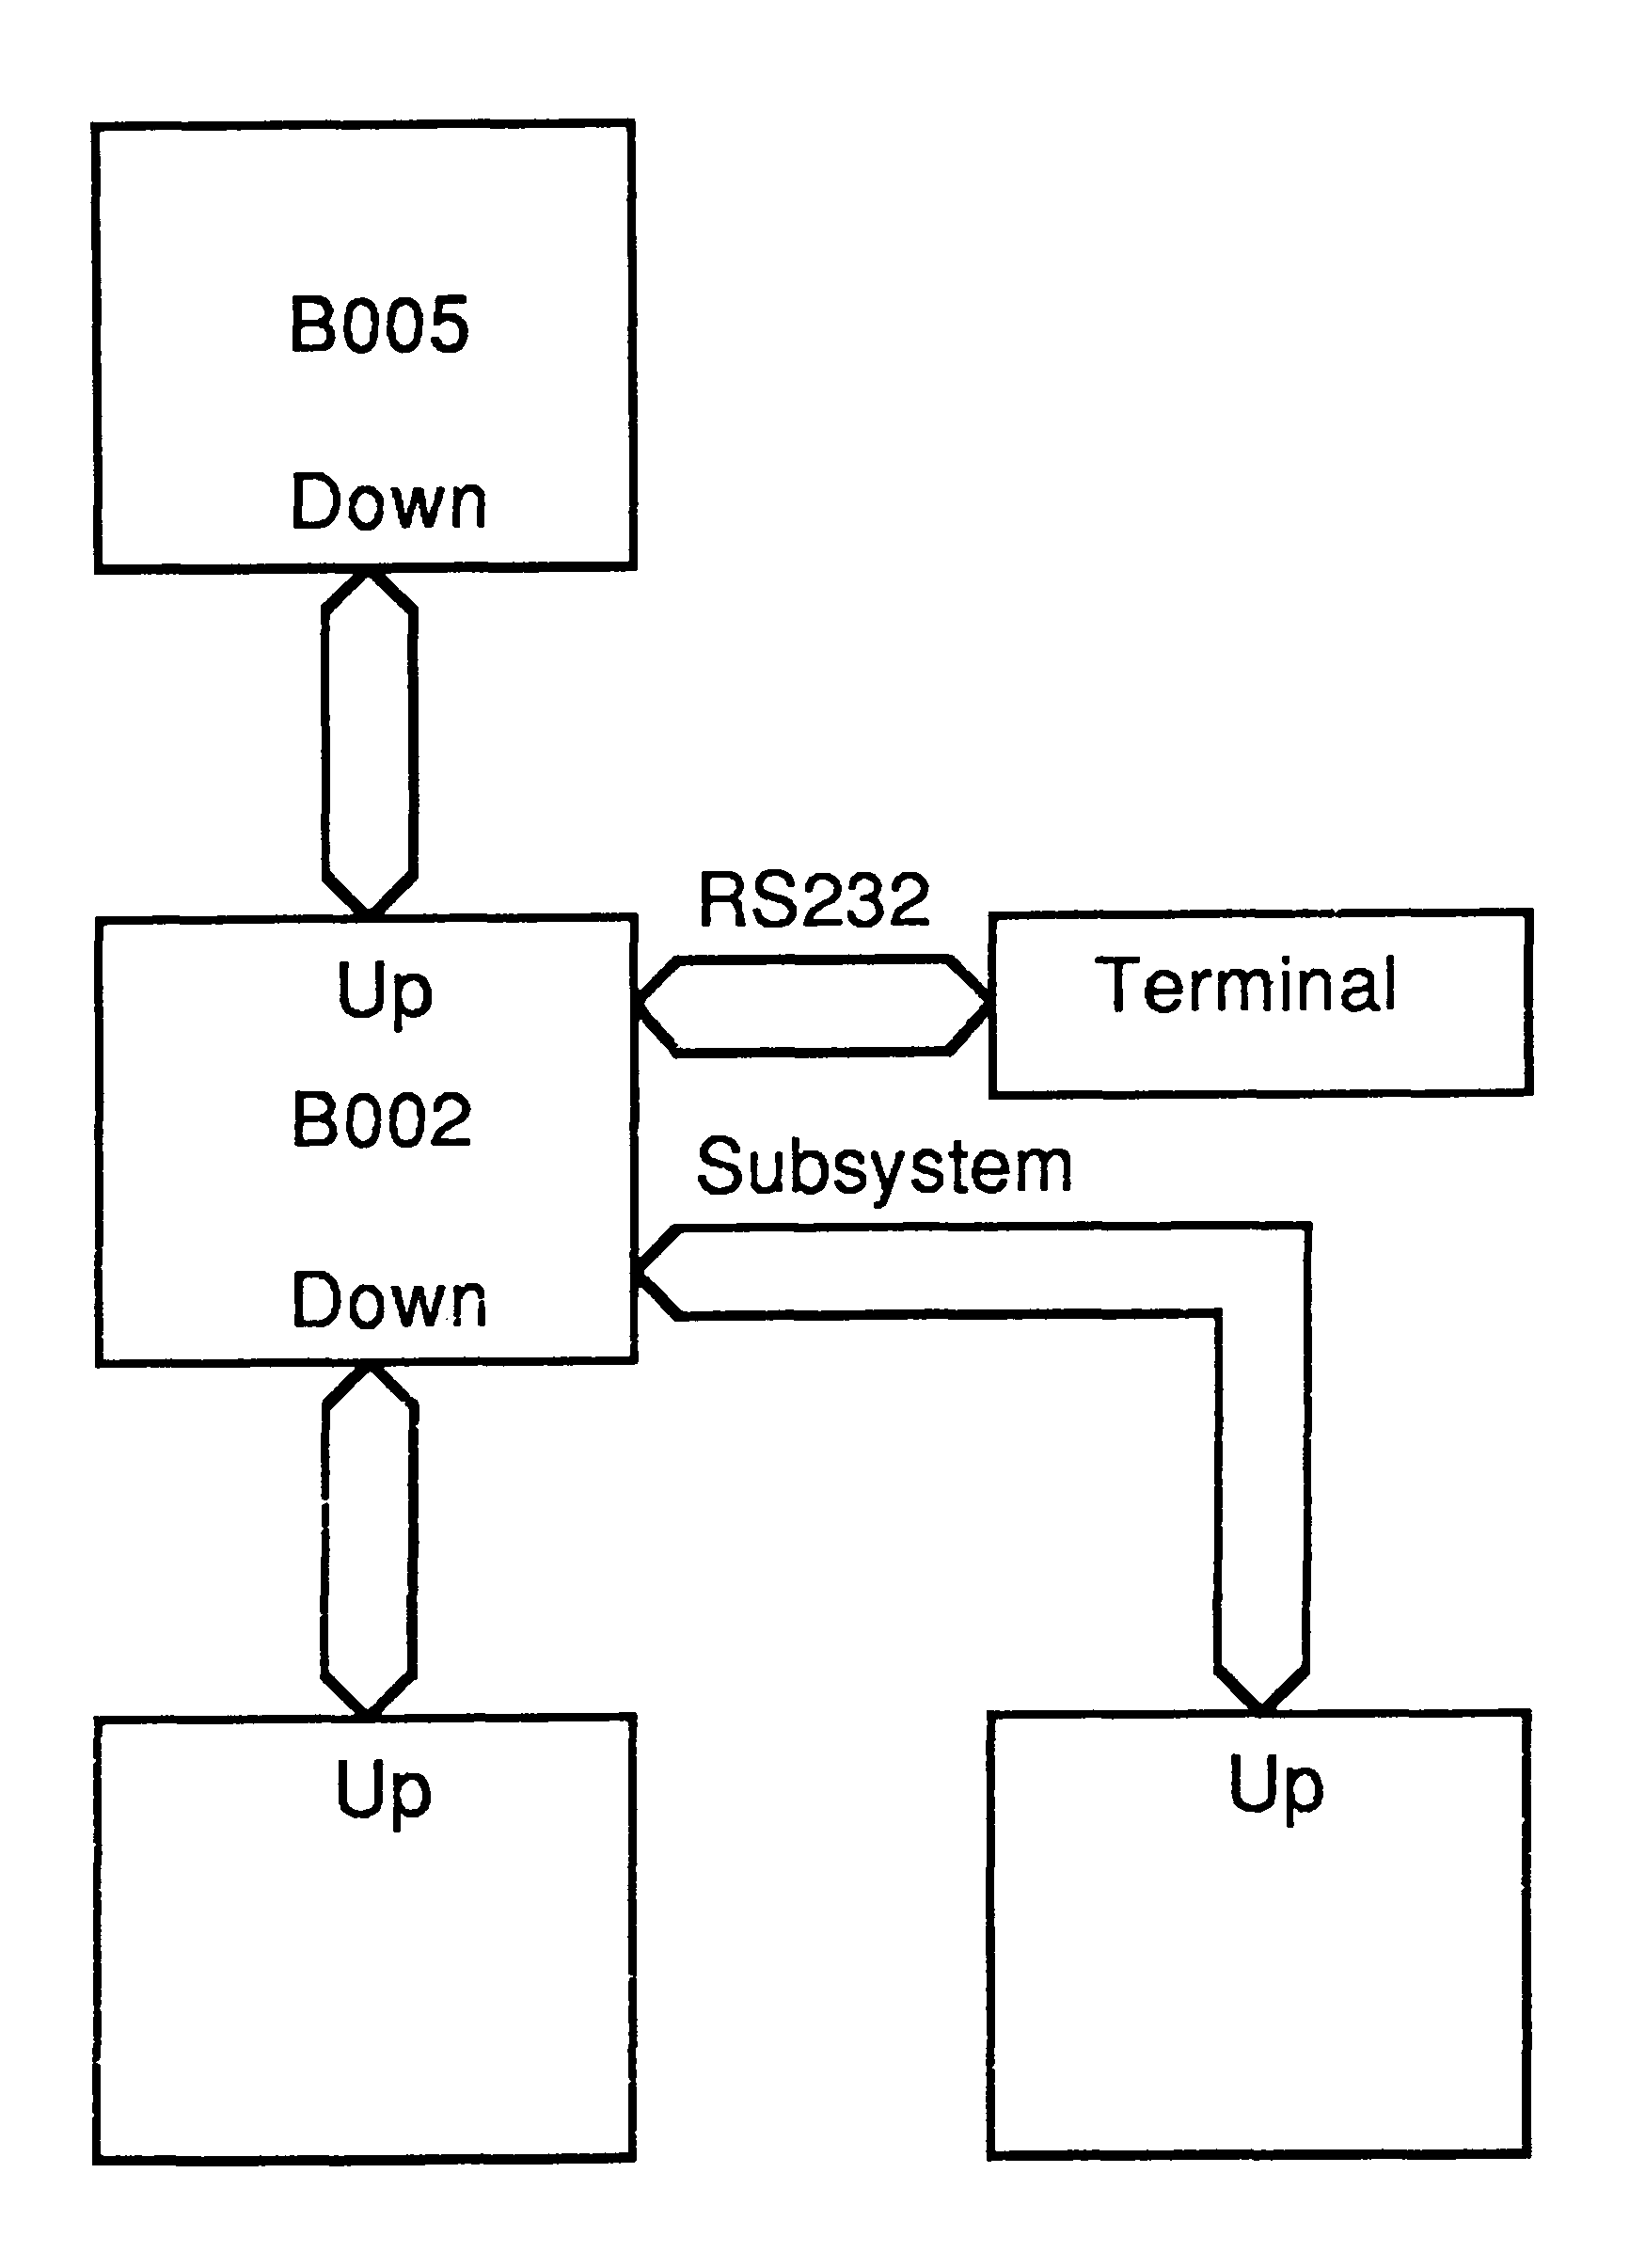 Example system using the IMS B005